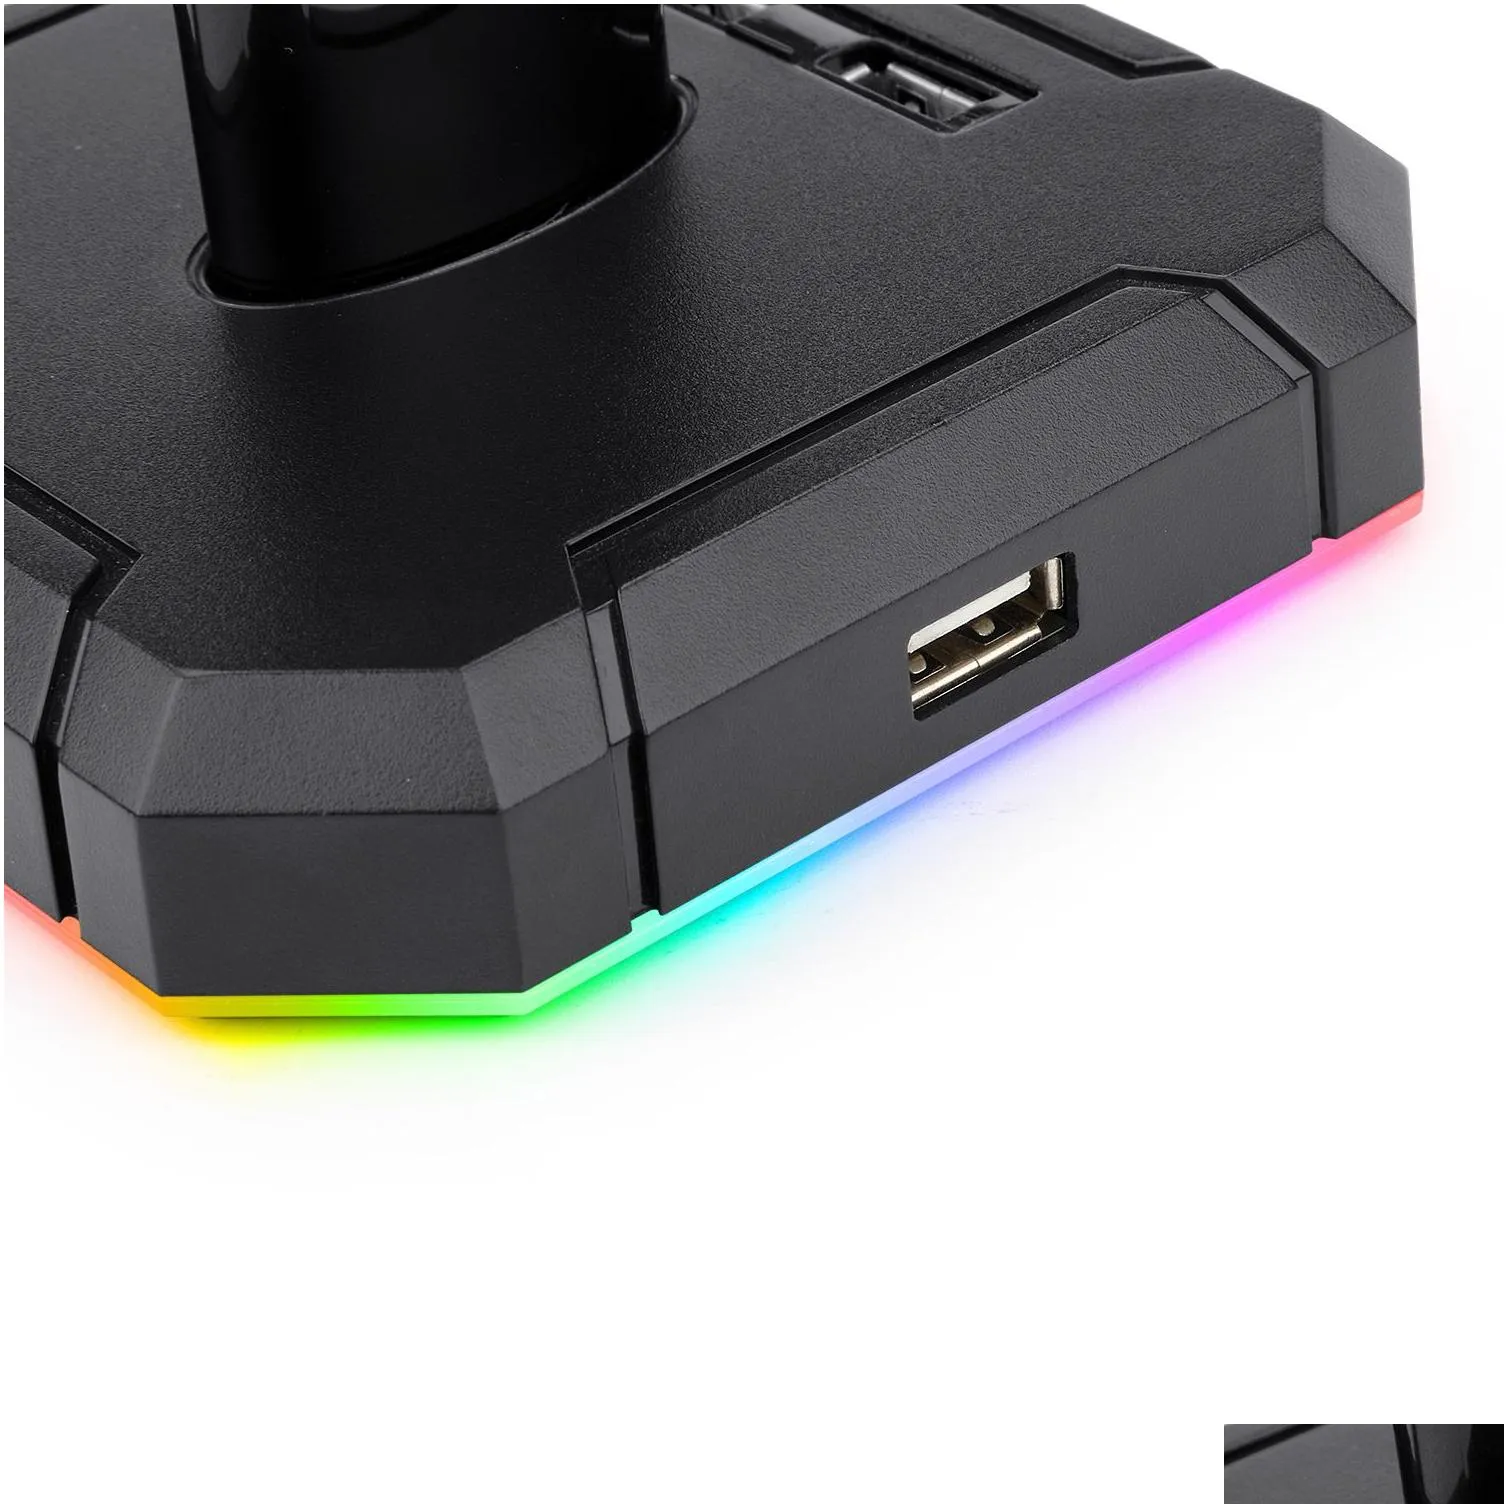 n HA300 Gaming Headset Stand RGB Backlit Aluminum Supporting Bar Non-Slip Solid Rubber Base 4X USB 2.0 for All Headphones